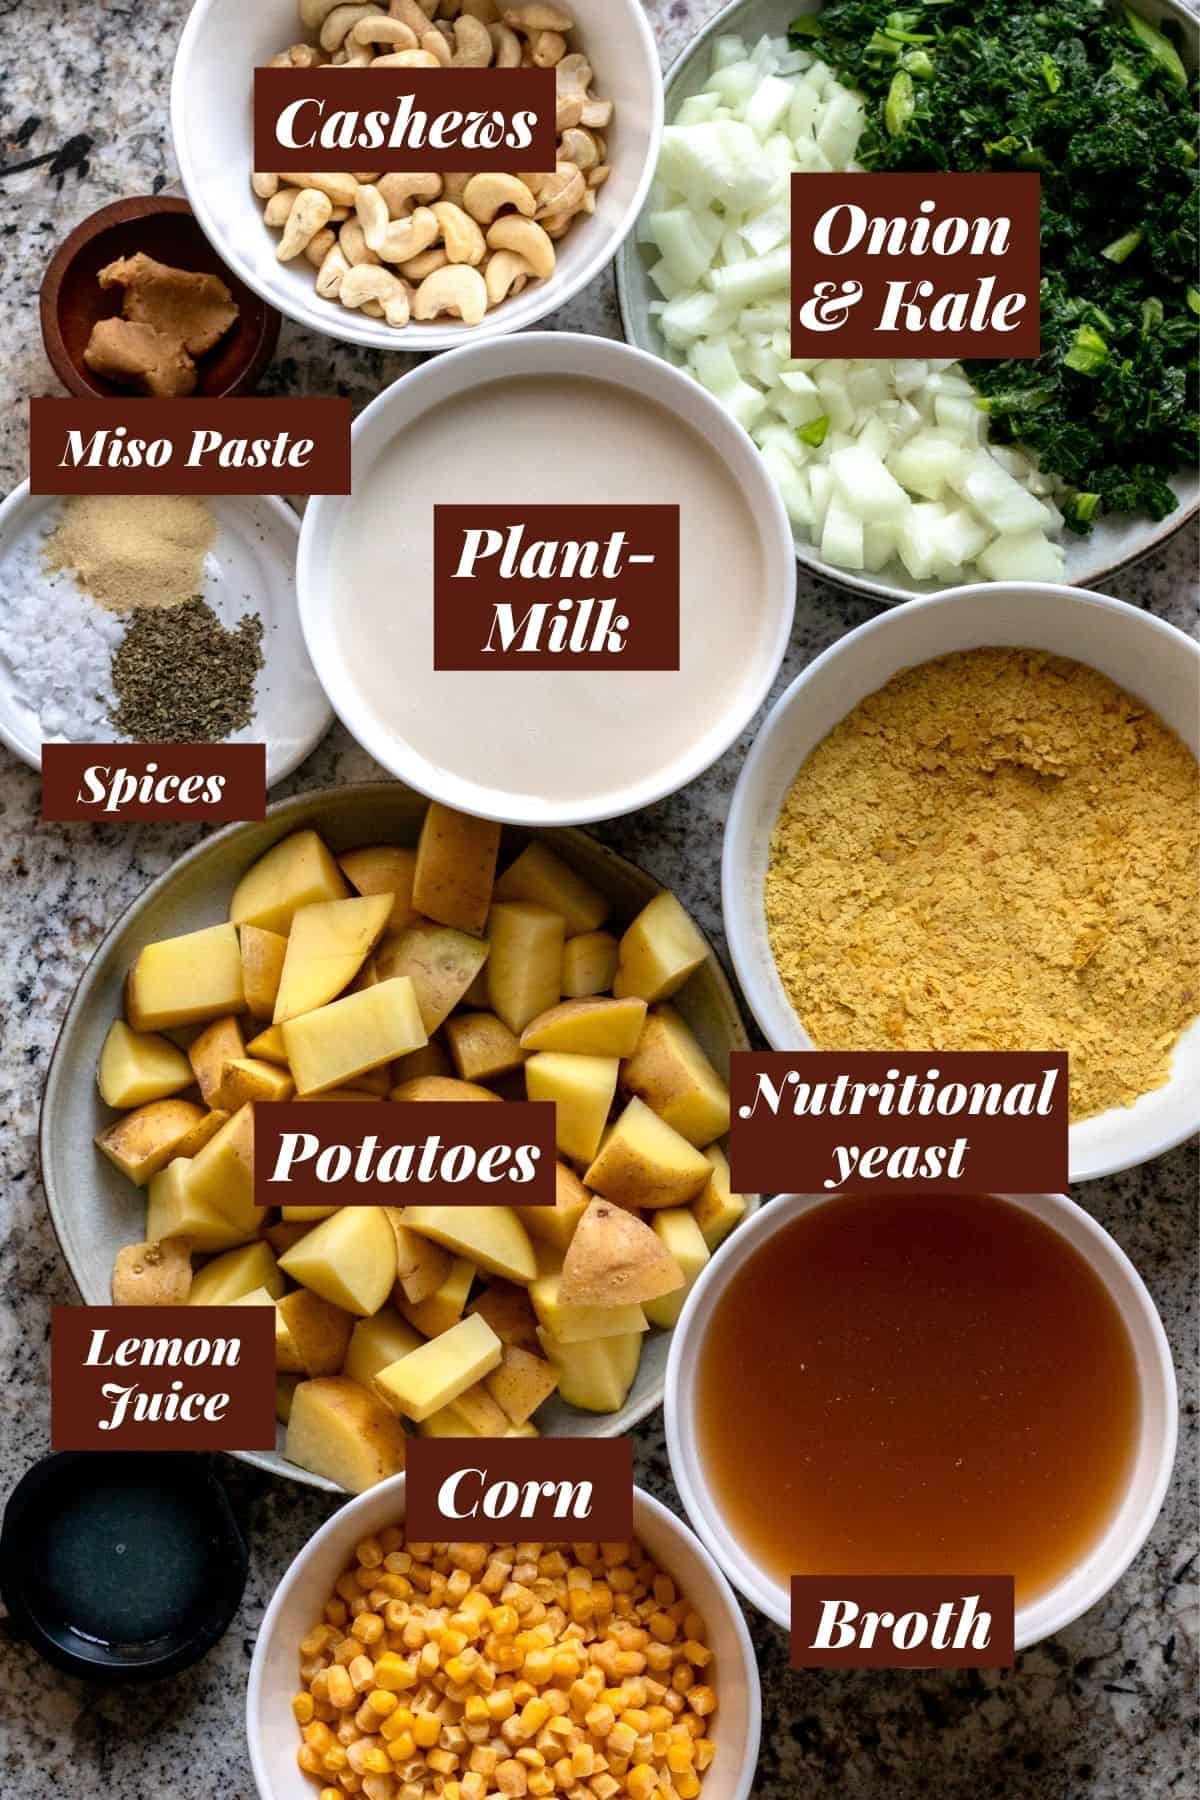 Ingredients with labels for recipe.